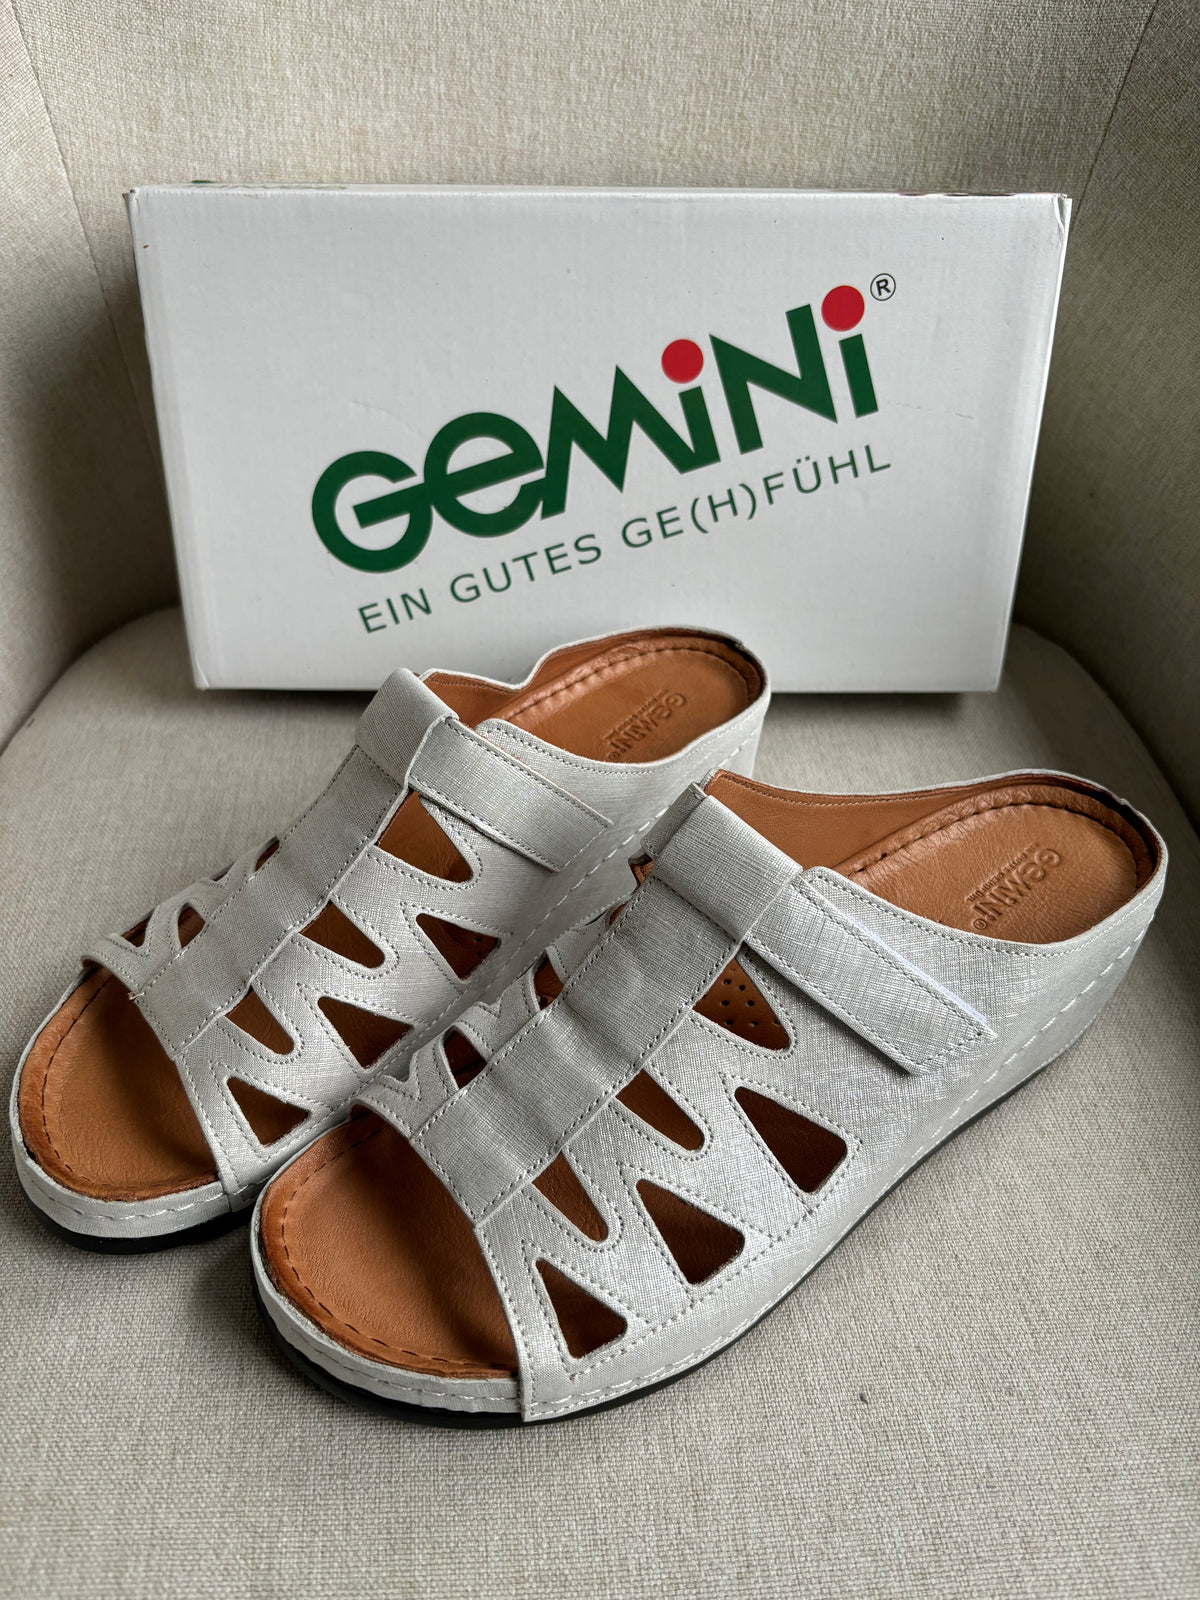 Silver comfort wedge sandals by Gemini